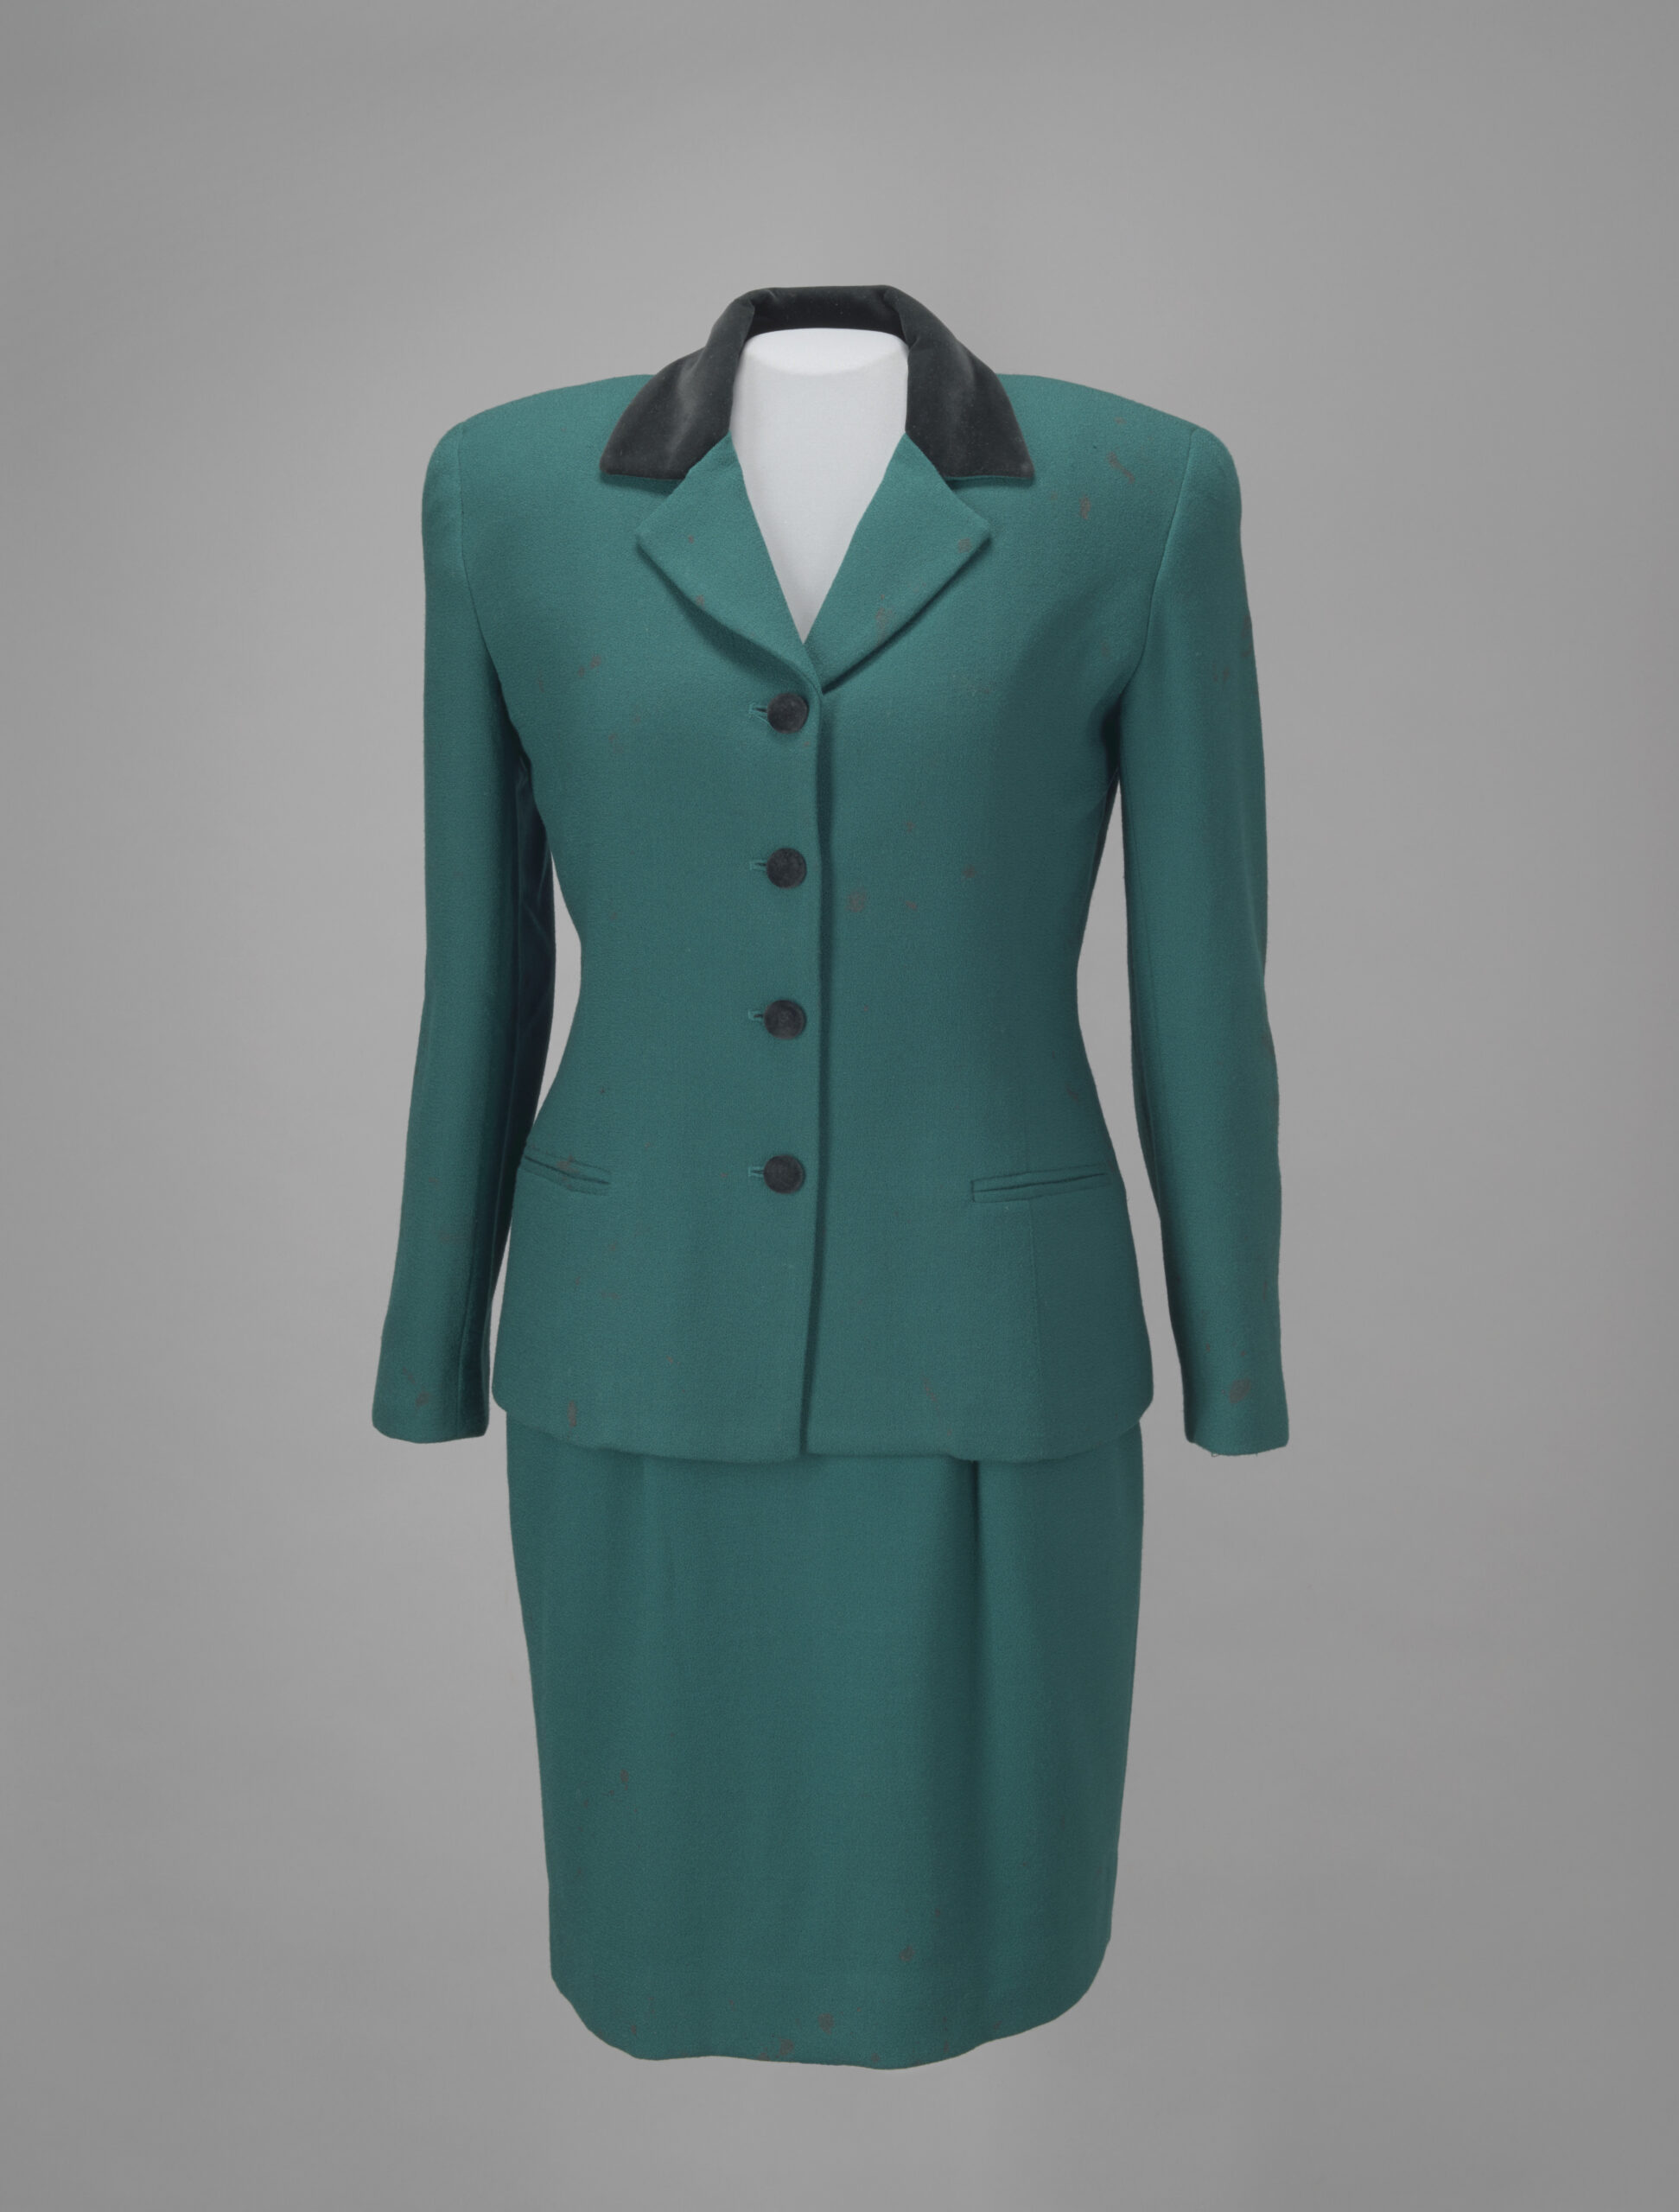 Ambassador Bushnell's Suit - The National Museum of American Diplomacy